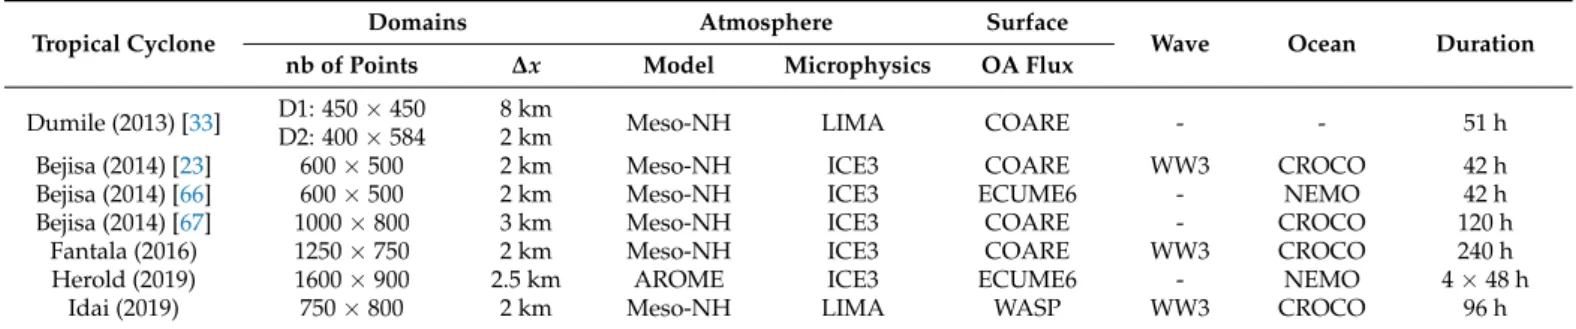 Table 1. Summary of the models used in the coupled simulations. The domain size and horizontal grid spacing (∆x) used for each model and each TC is indicated